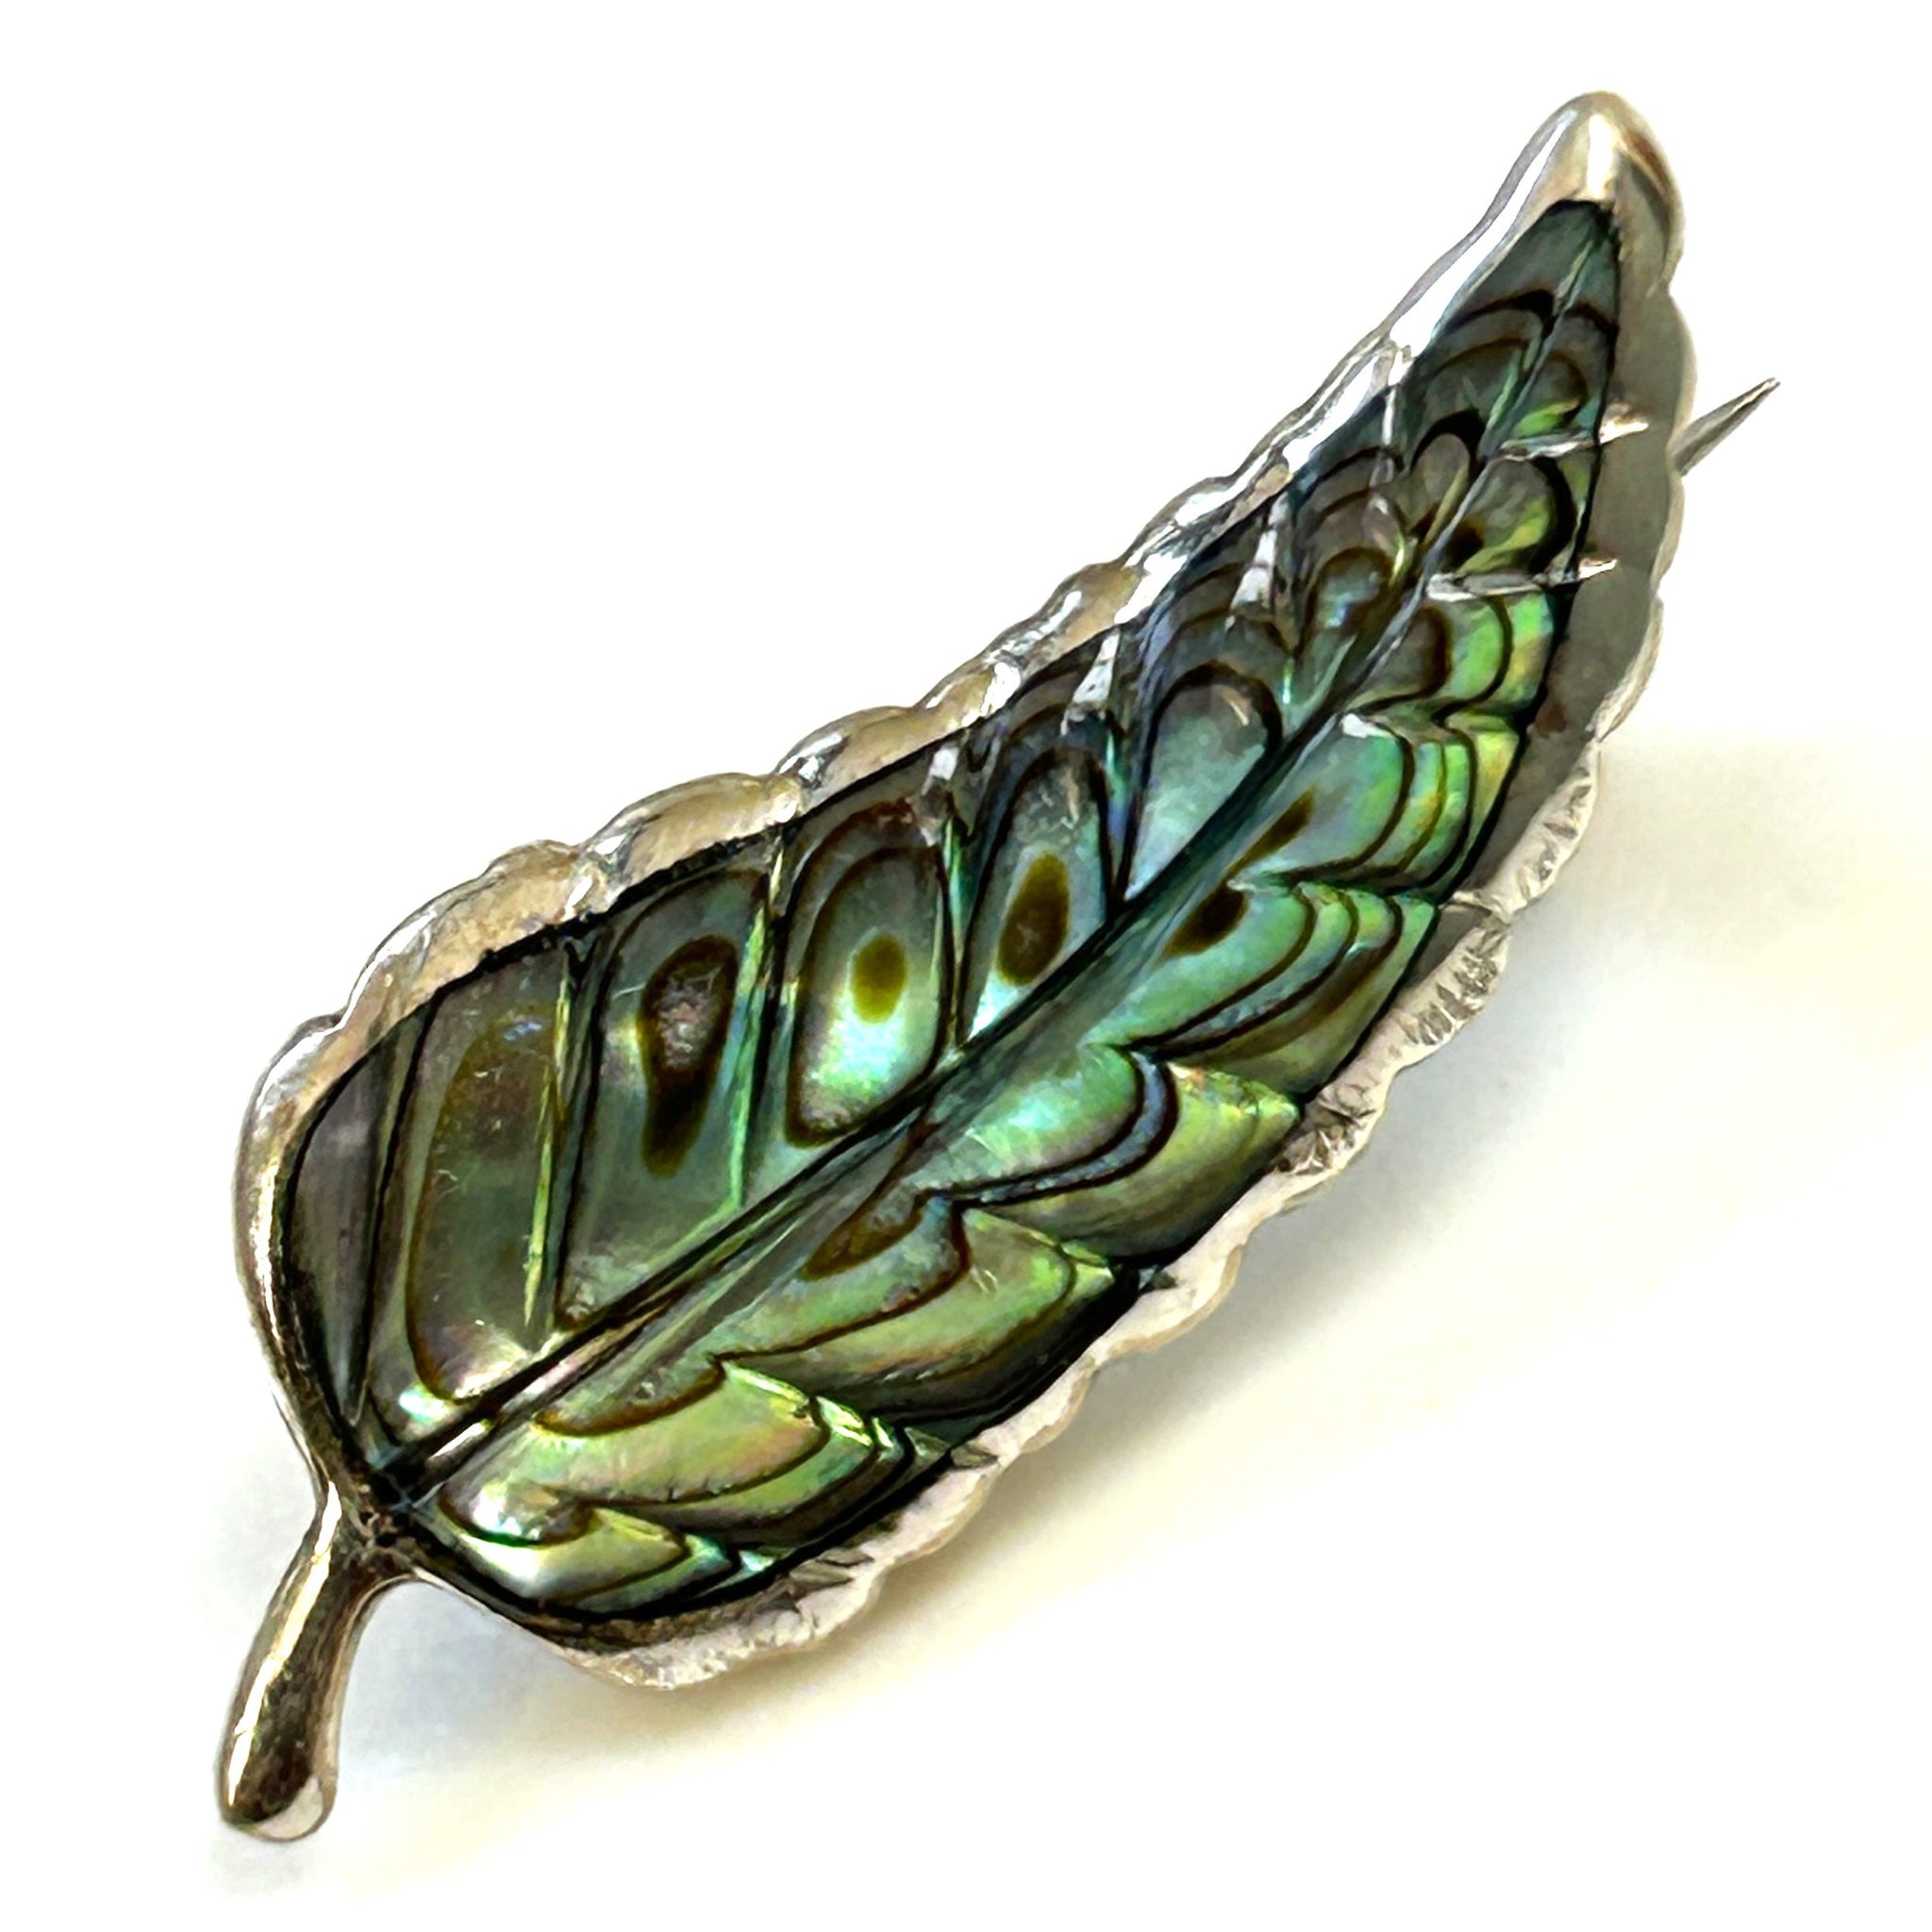 Small Vintage Silver and Nacre “Leaf” Brooch